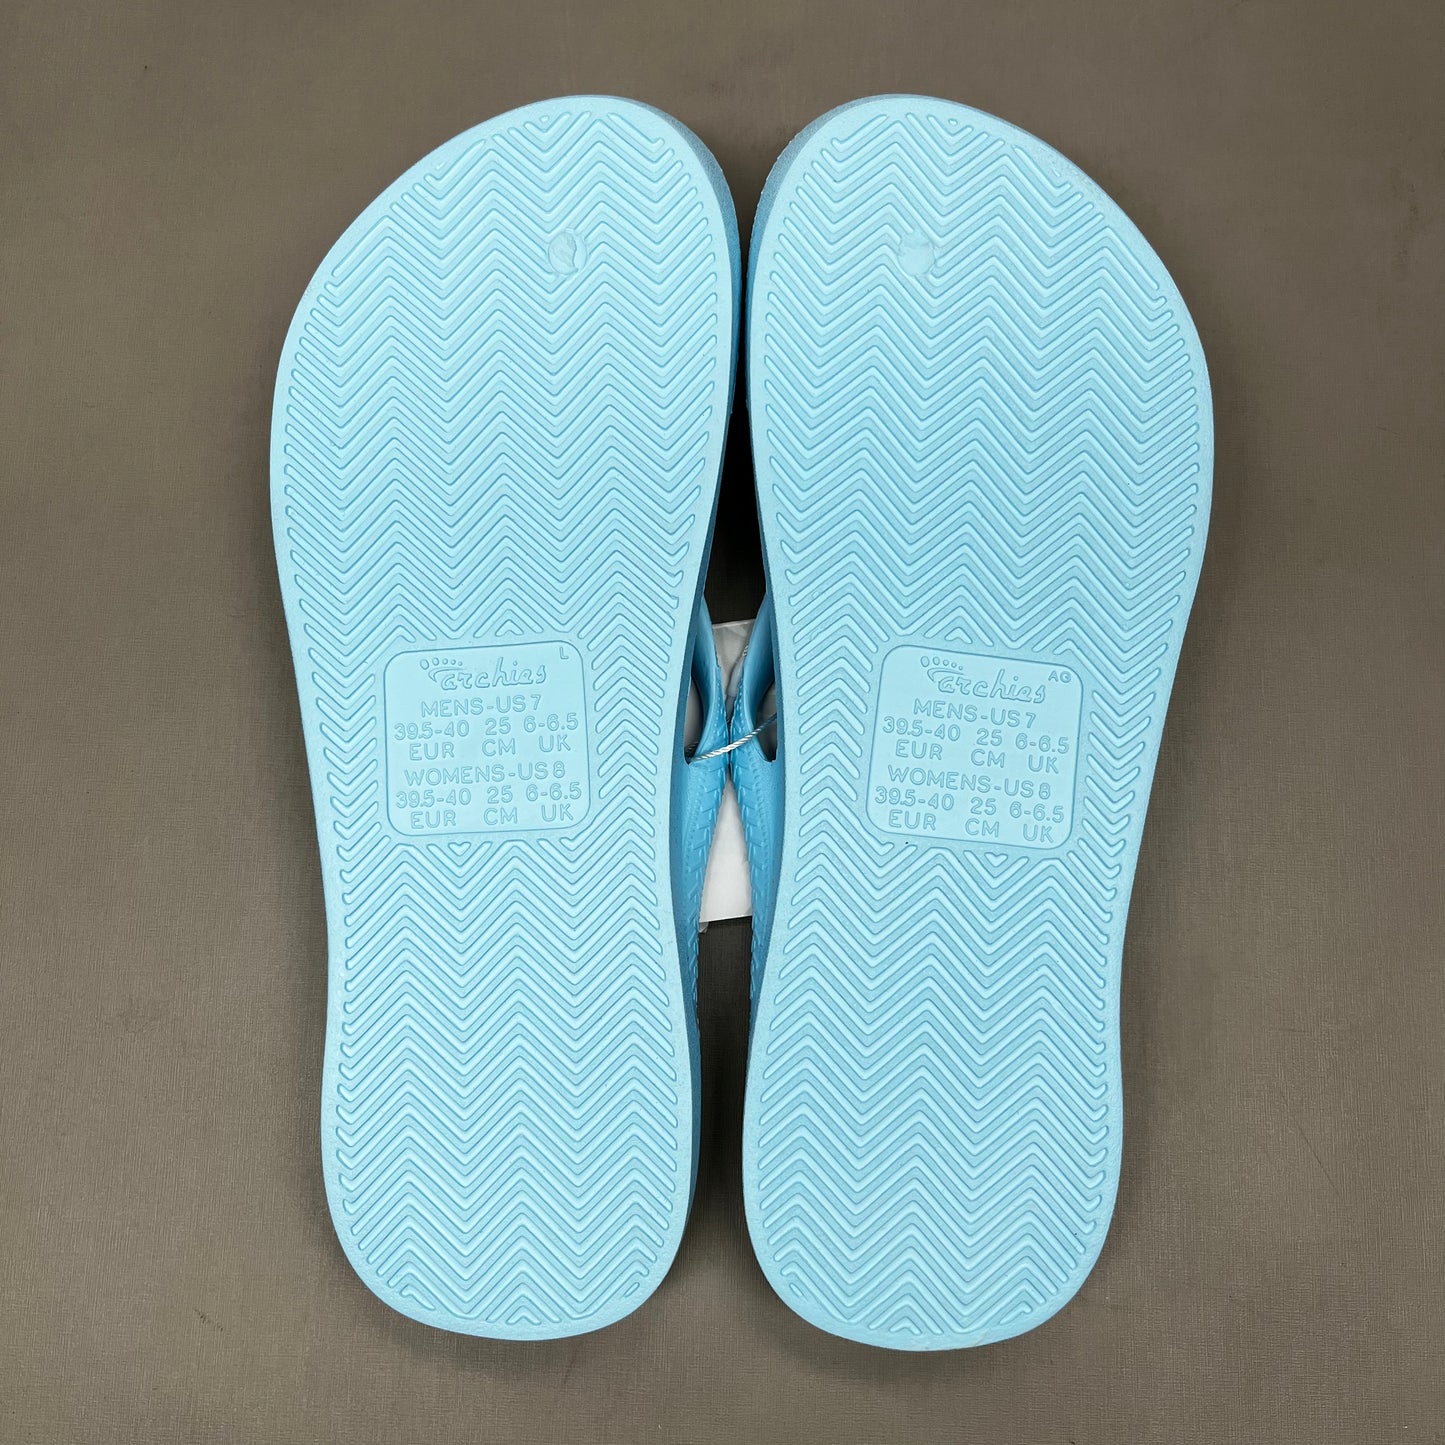 ARCHIES Arch Support Thongs HIGH SUPPORT Flip Flops Wmn's Sz 5 Men's 4 baby blue (New)